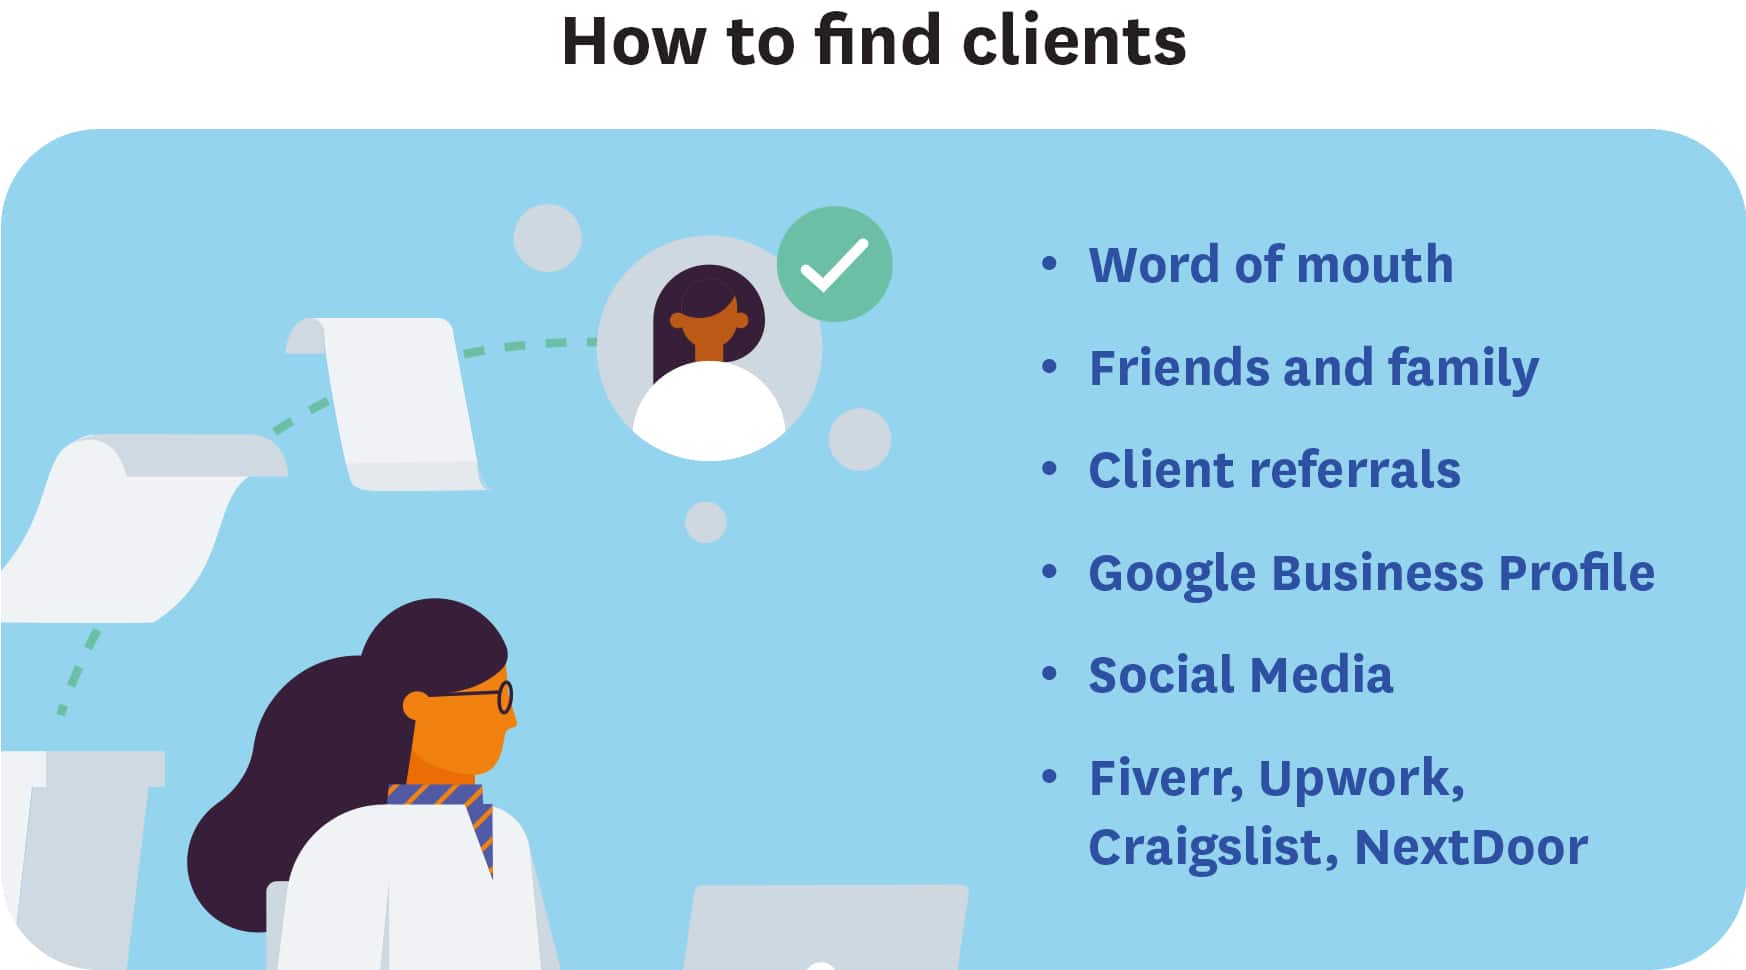 The best way to find clients include networking and via platforms like Fiverr, Upwork, Craigslist, and Nextdoor.